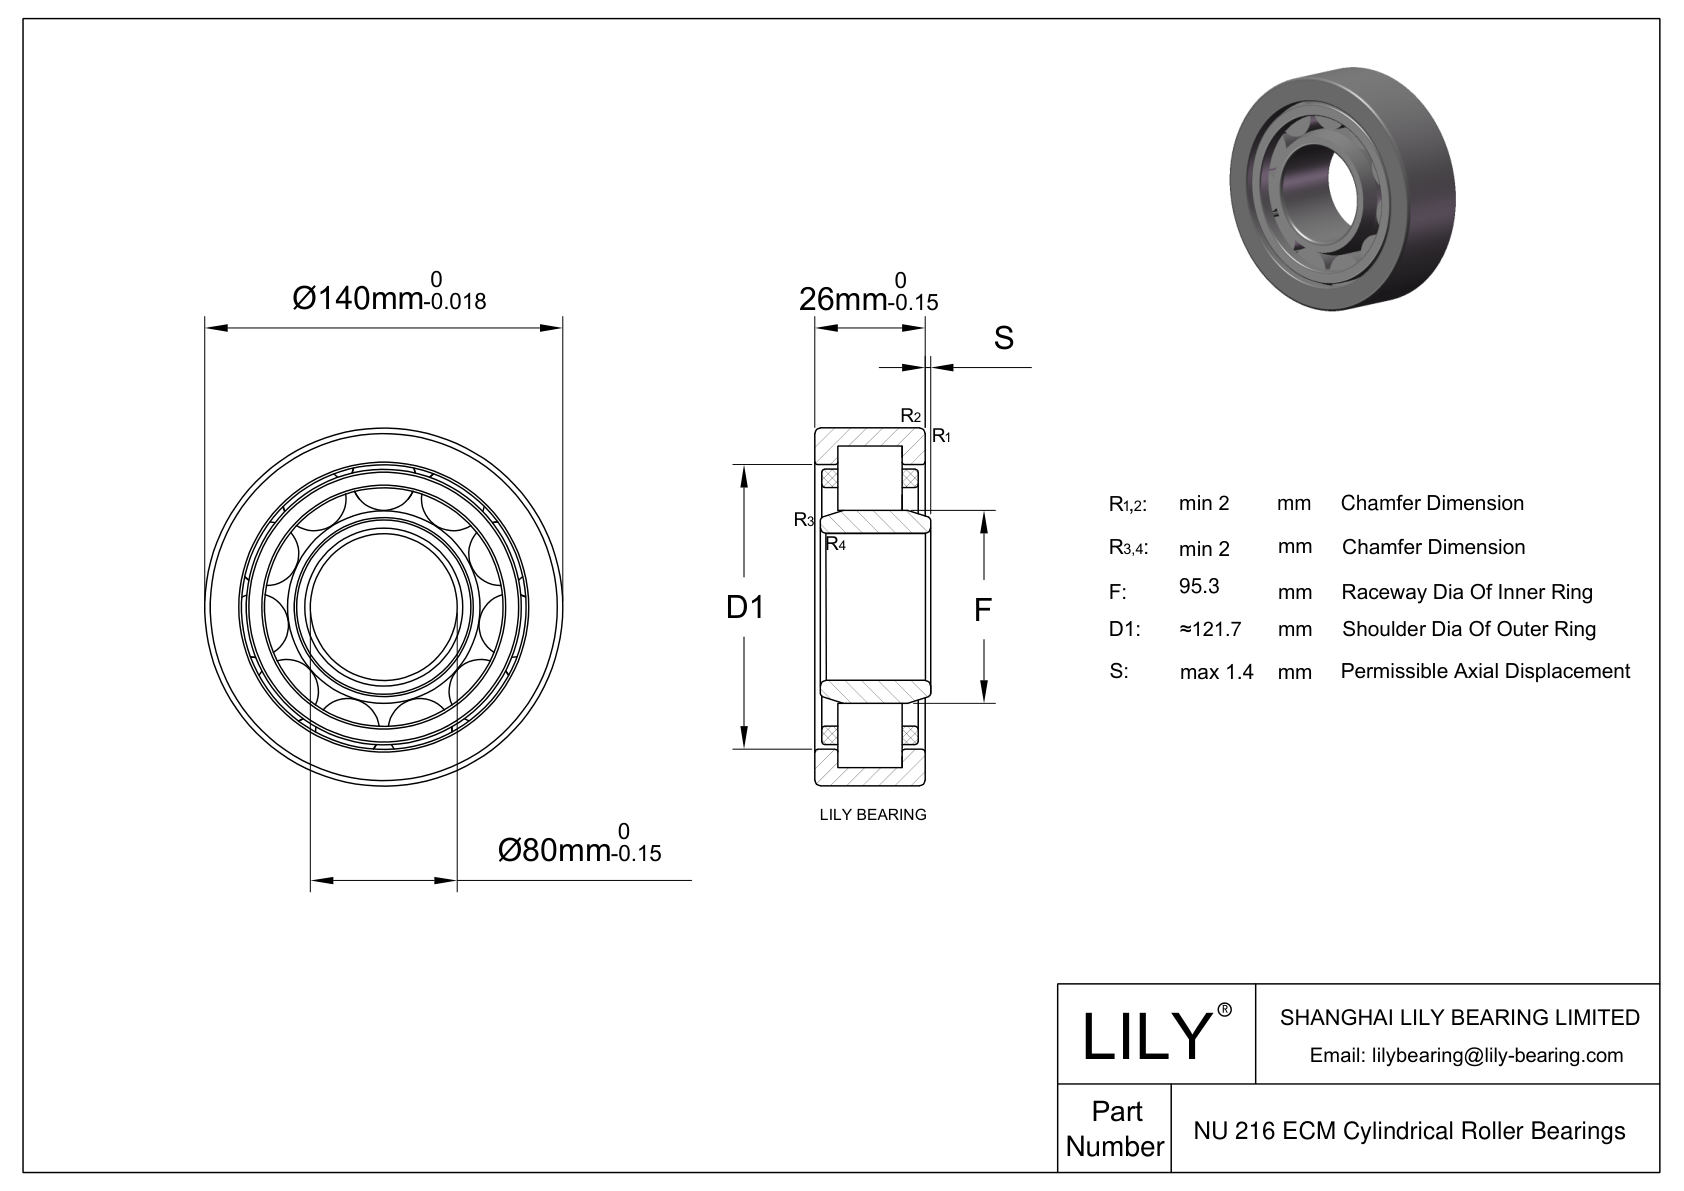 NU 216 ECM/C3VL0241 Ceramic Coated Cylindrical Roller Bearings cad drawing